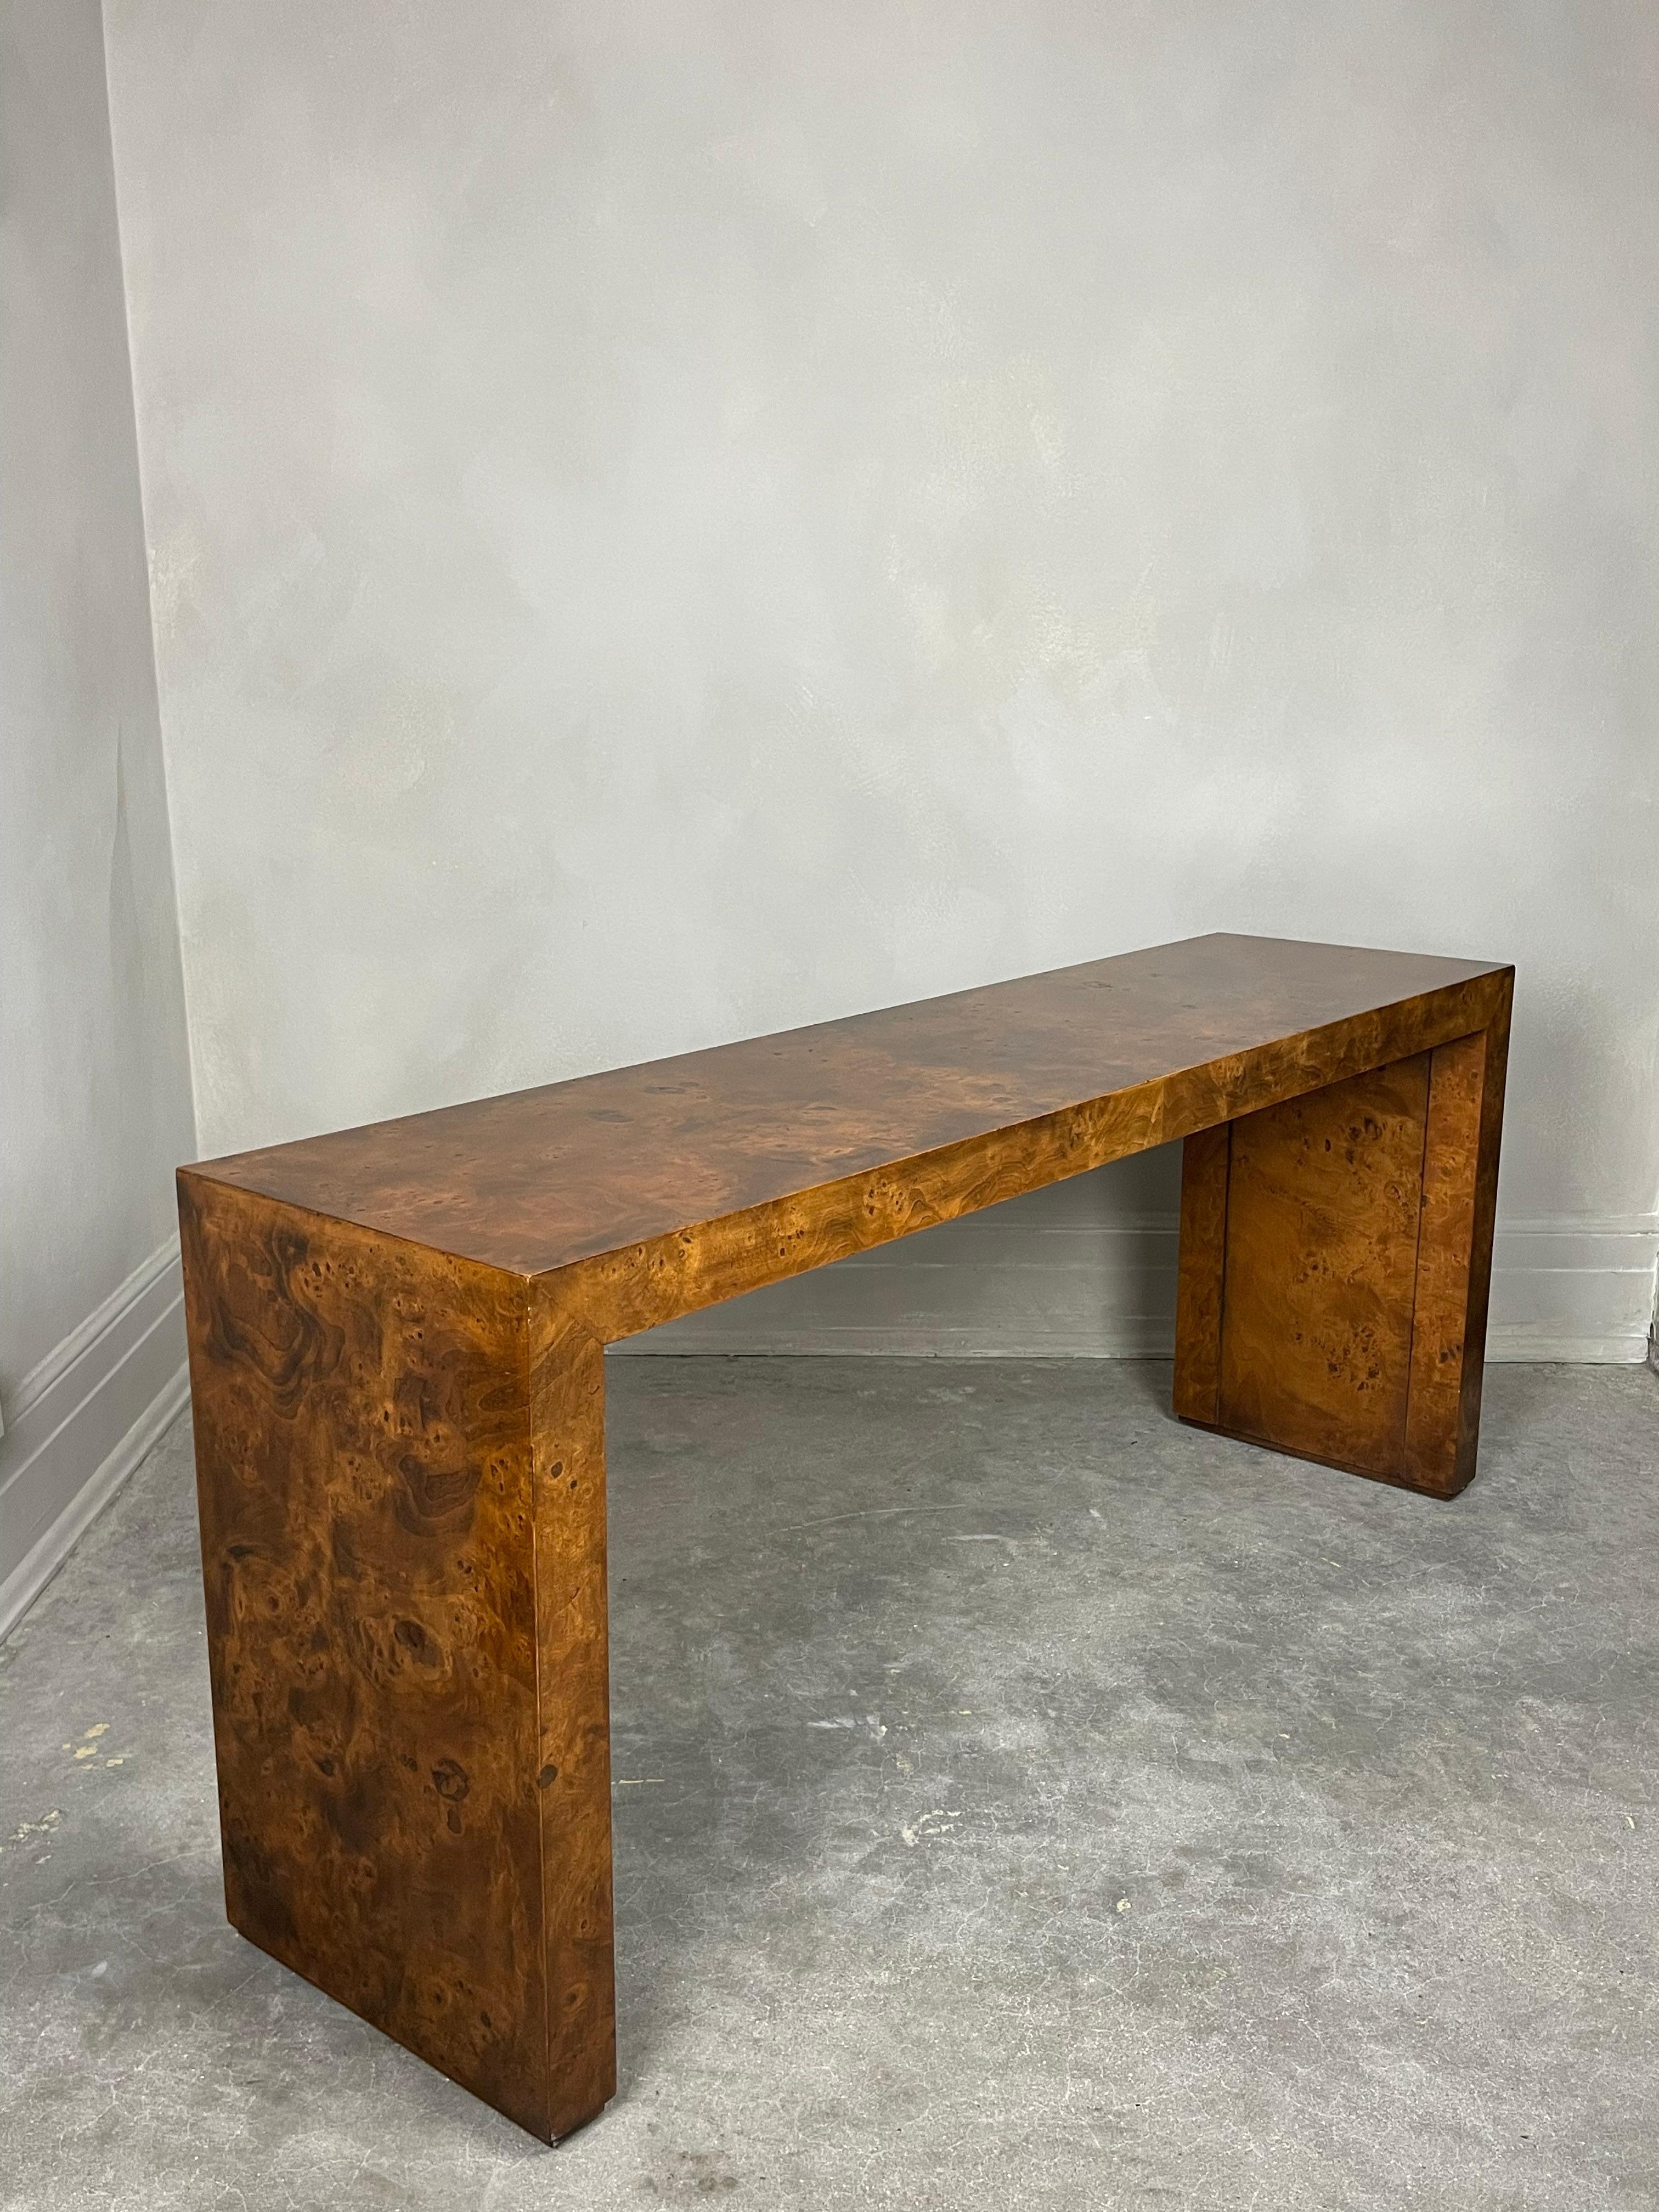 Gorgeous waterfall burl wood table attributed to Milo Baughman manufactured by Heckman Furniture. A sleek and sophisticated design perfect for a post modern or MCM home. Features long slabs of burl wood veneer which is rare to find in modern day